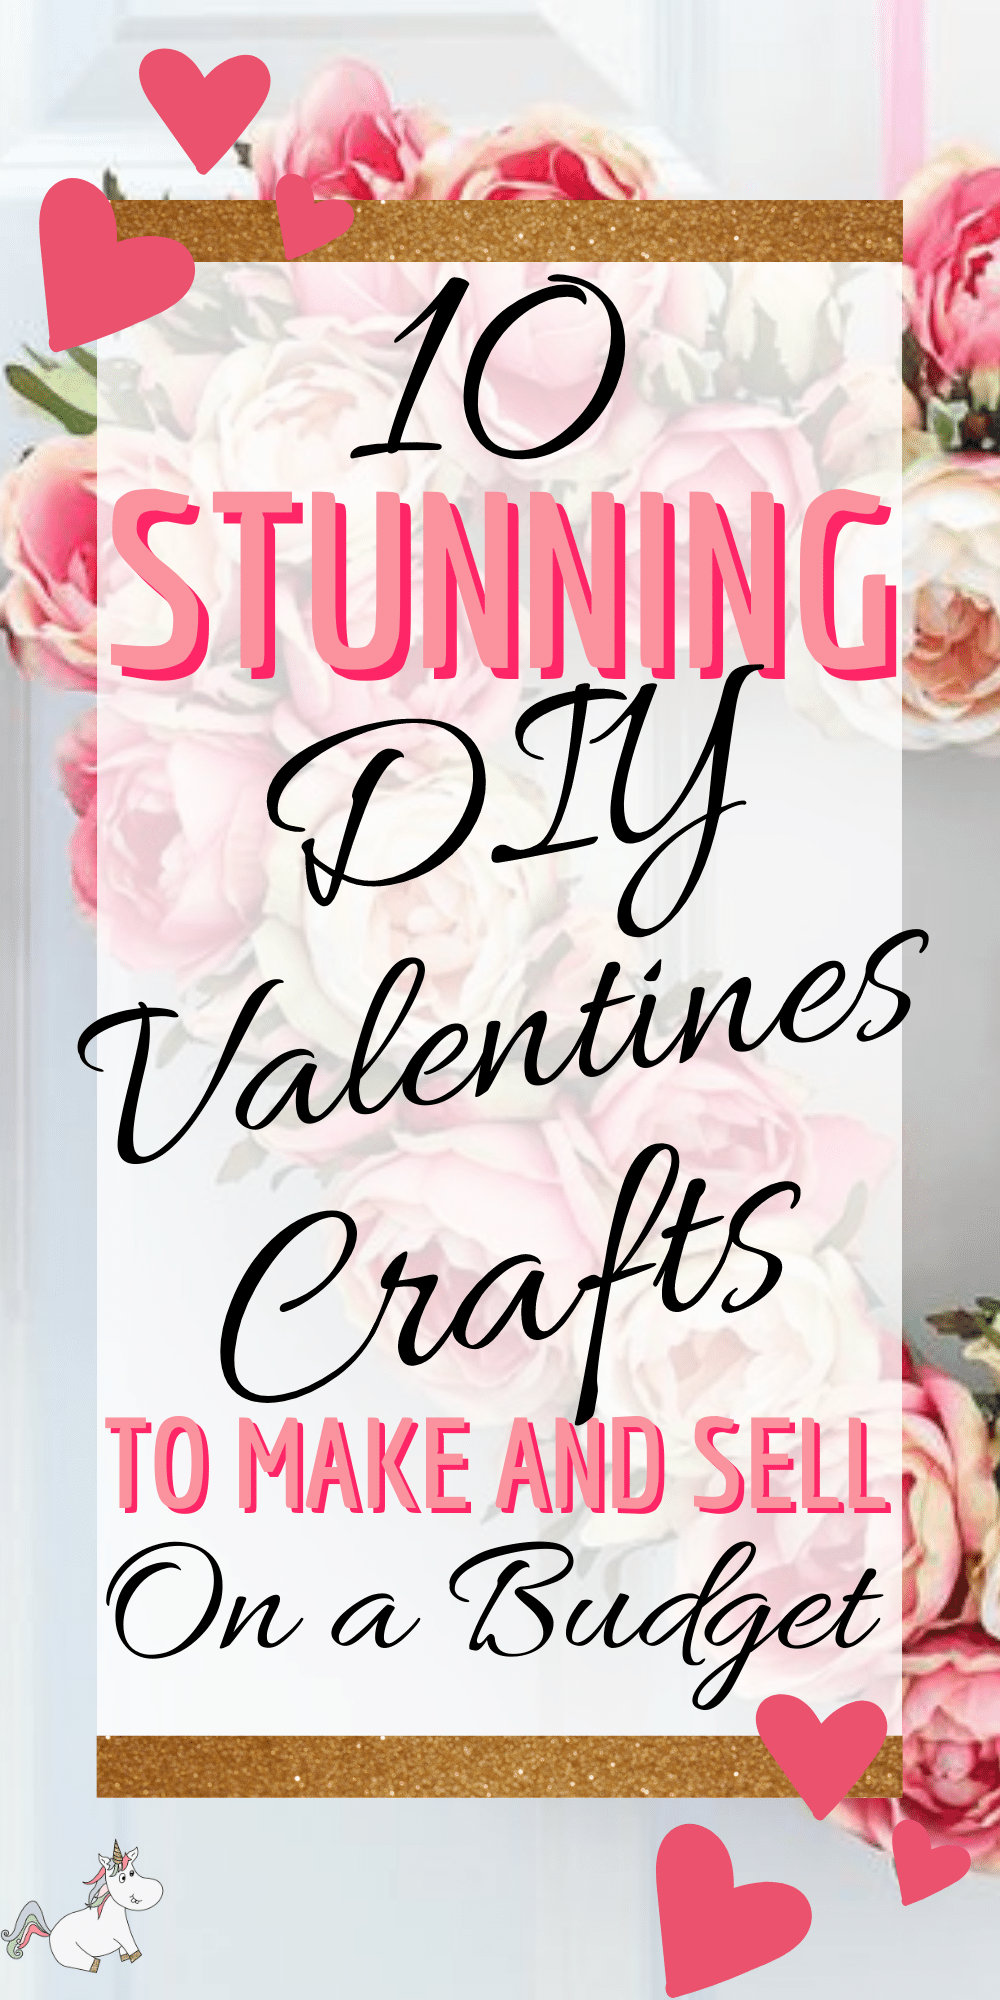 10 Stunning DIY Valentine's Crafts To Make and Sell On A Budget! Whether you're looking for Valentine's day gifts to sell or for popular Valentine's day decor ideas that you can sell for profit, we've got some wonderful easy crafts for you in this post! Selling crafts is a great way to make extra cash and the ideas we have for you are all popular sellers and trending crafts that can be sold online at Etsy or even at your local craft fairs!